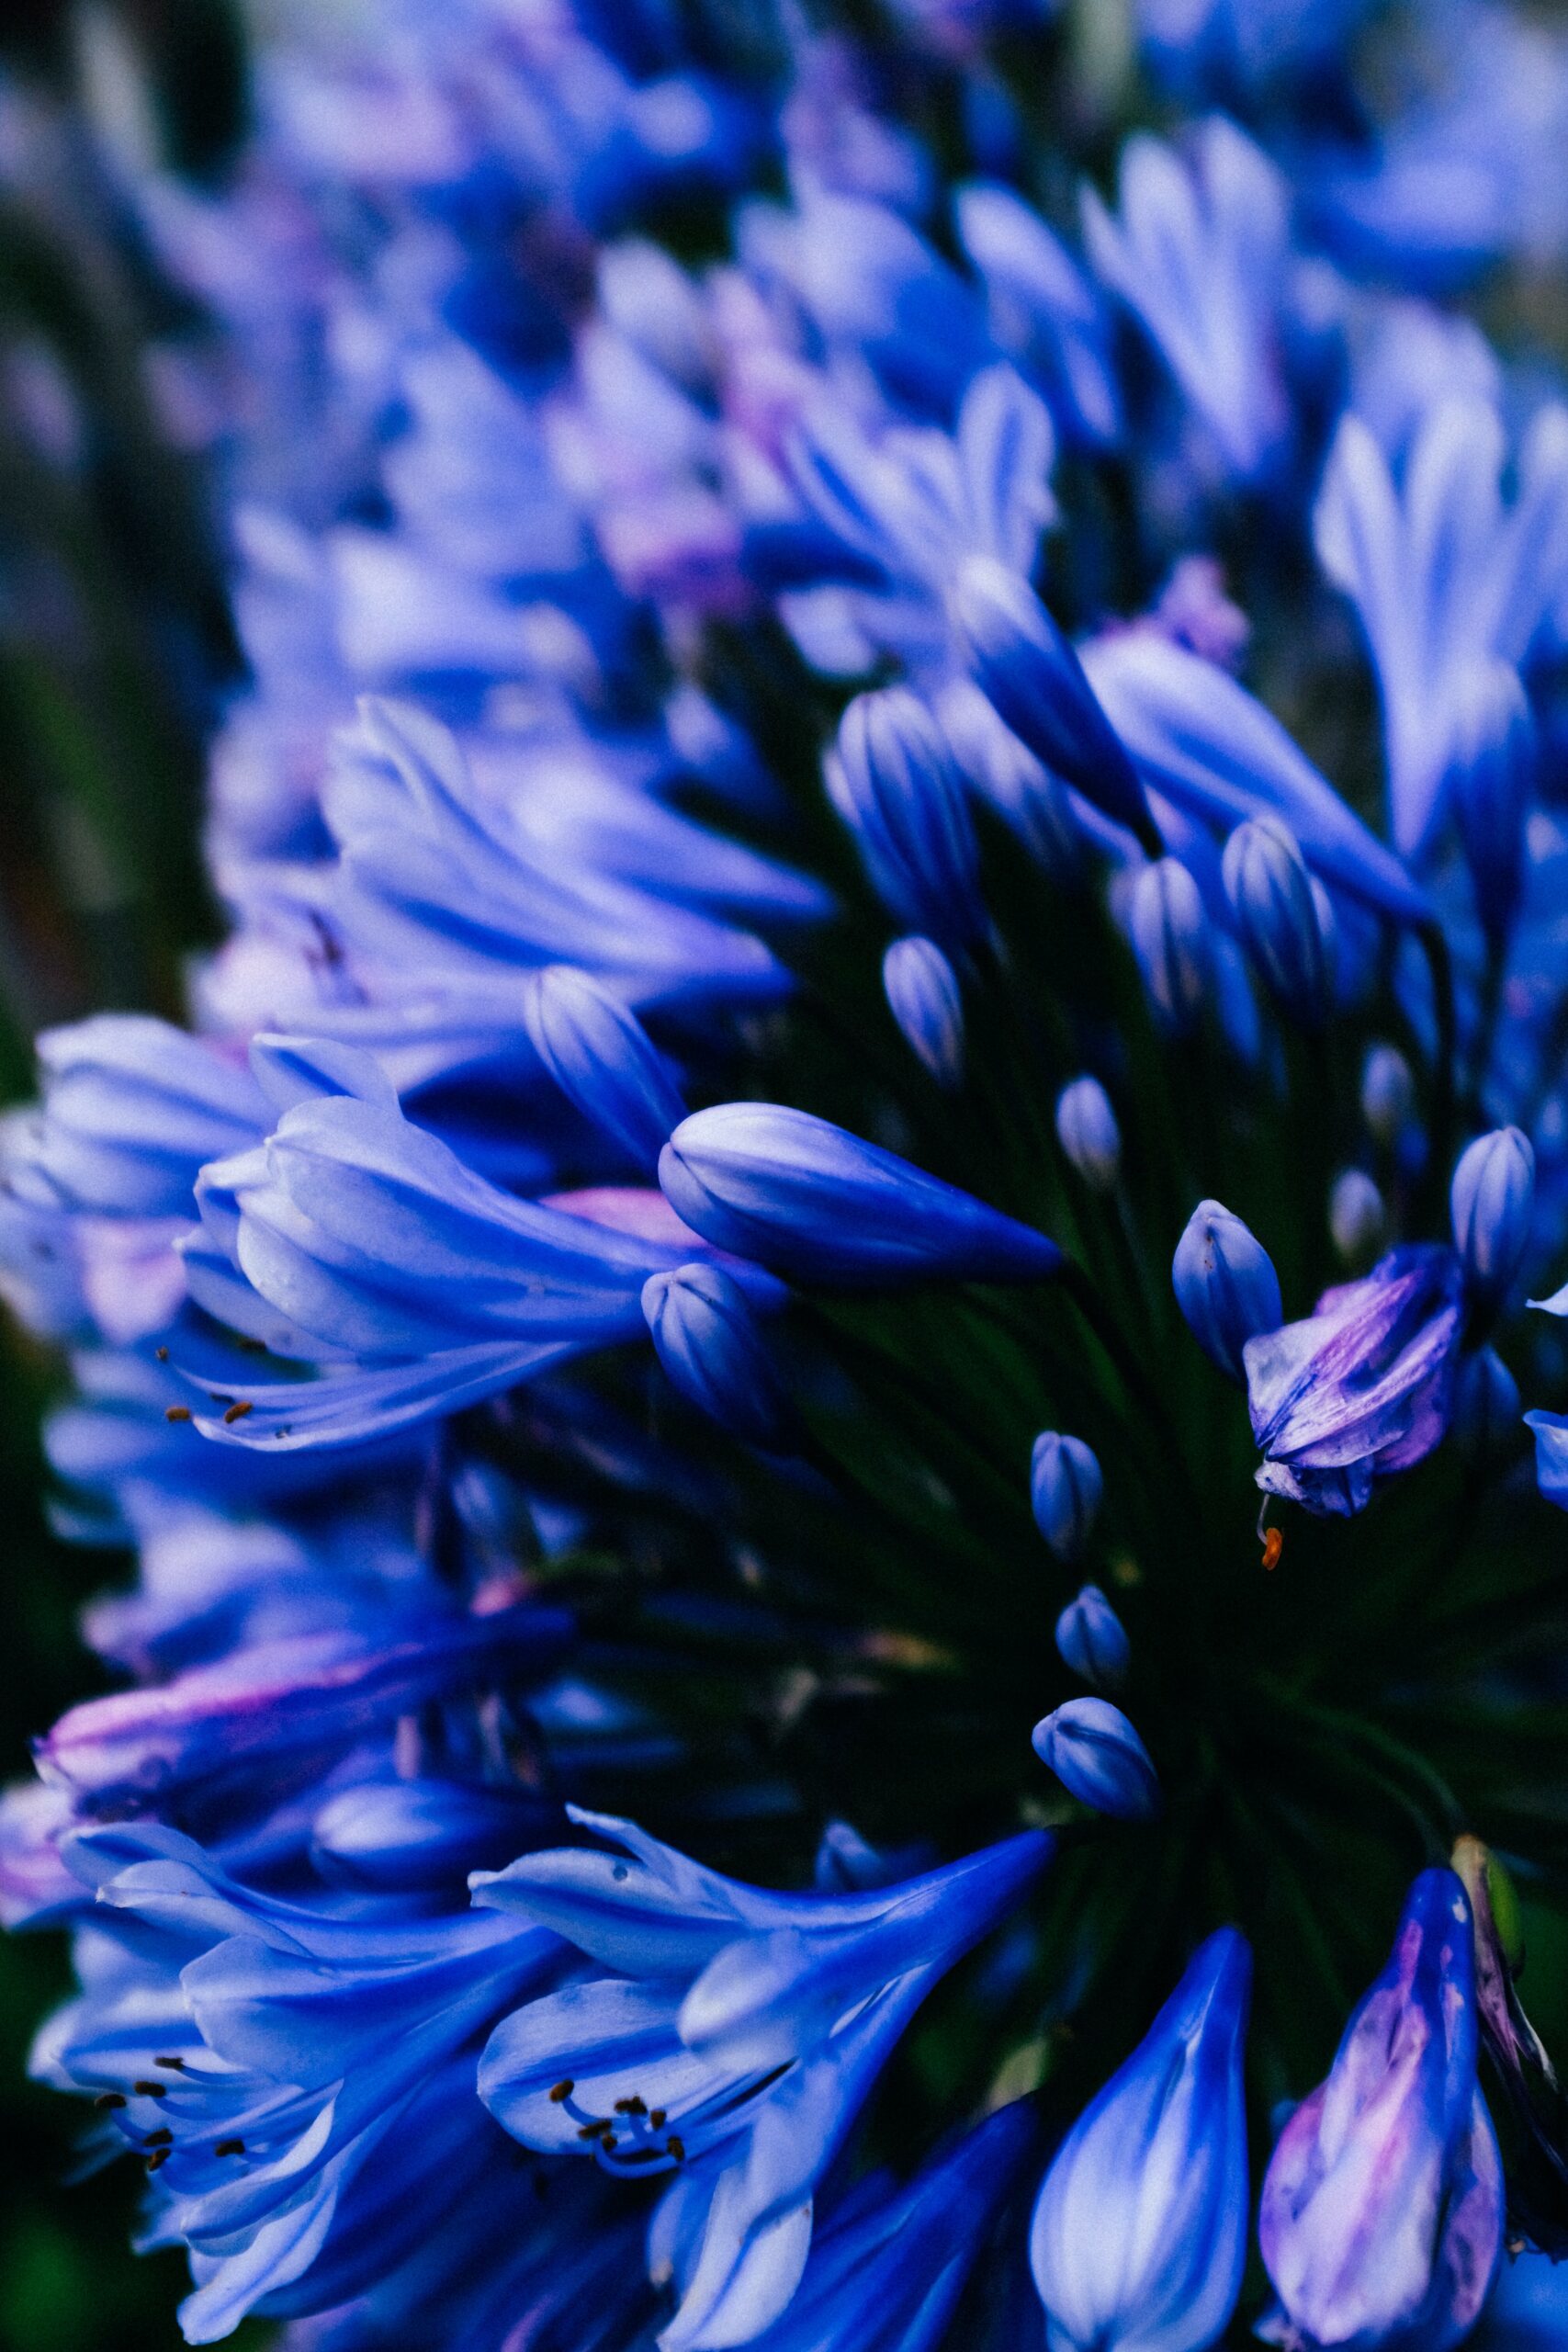 Agapanthus, or Lily of the Nile or Blue African Lily